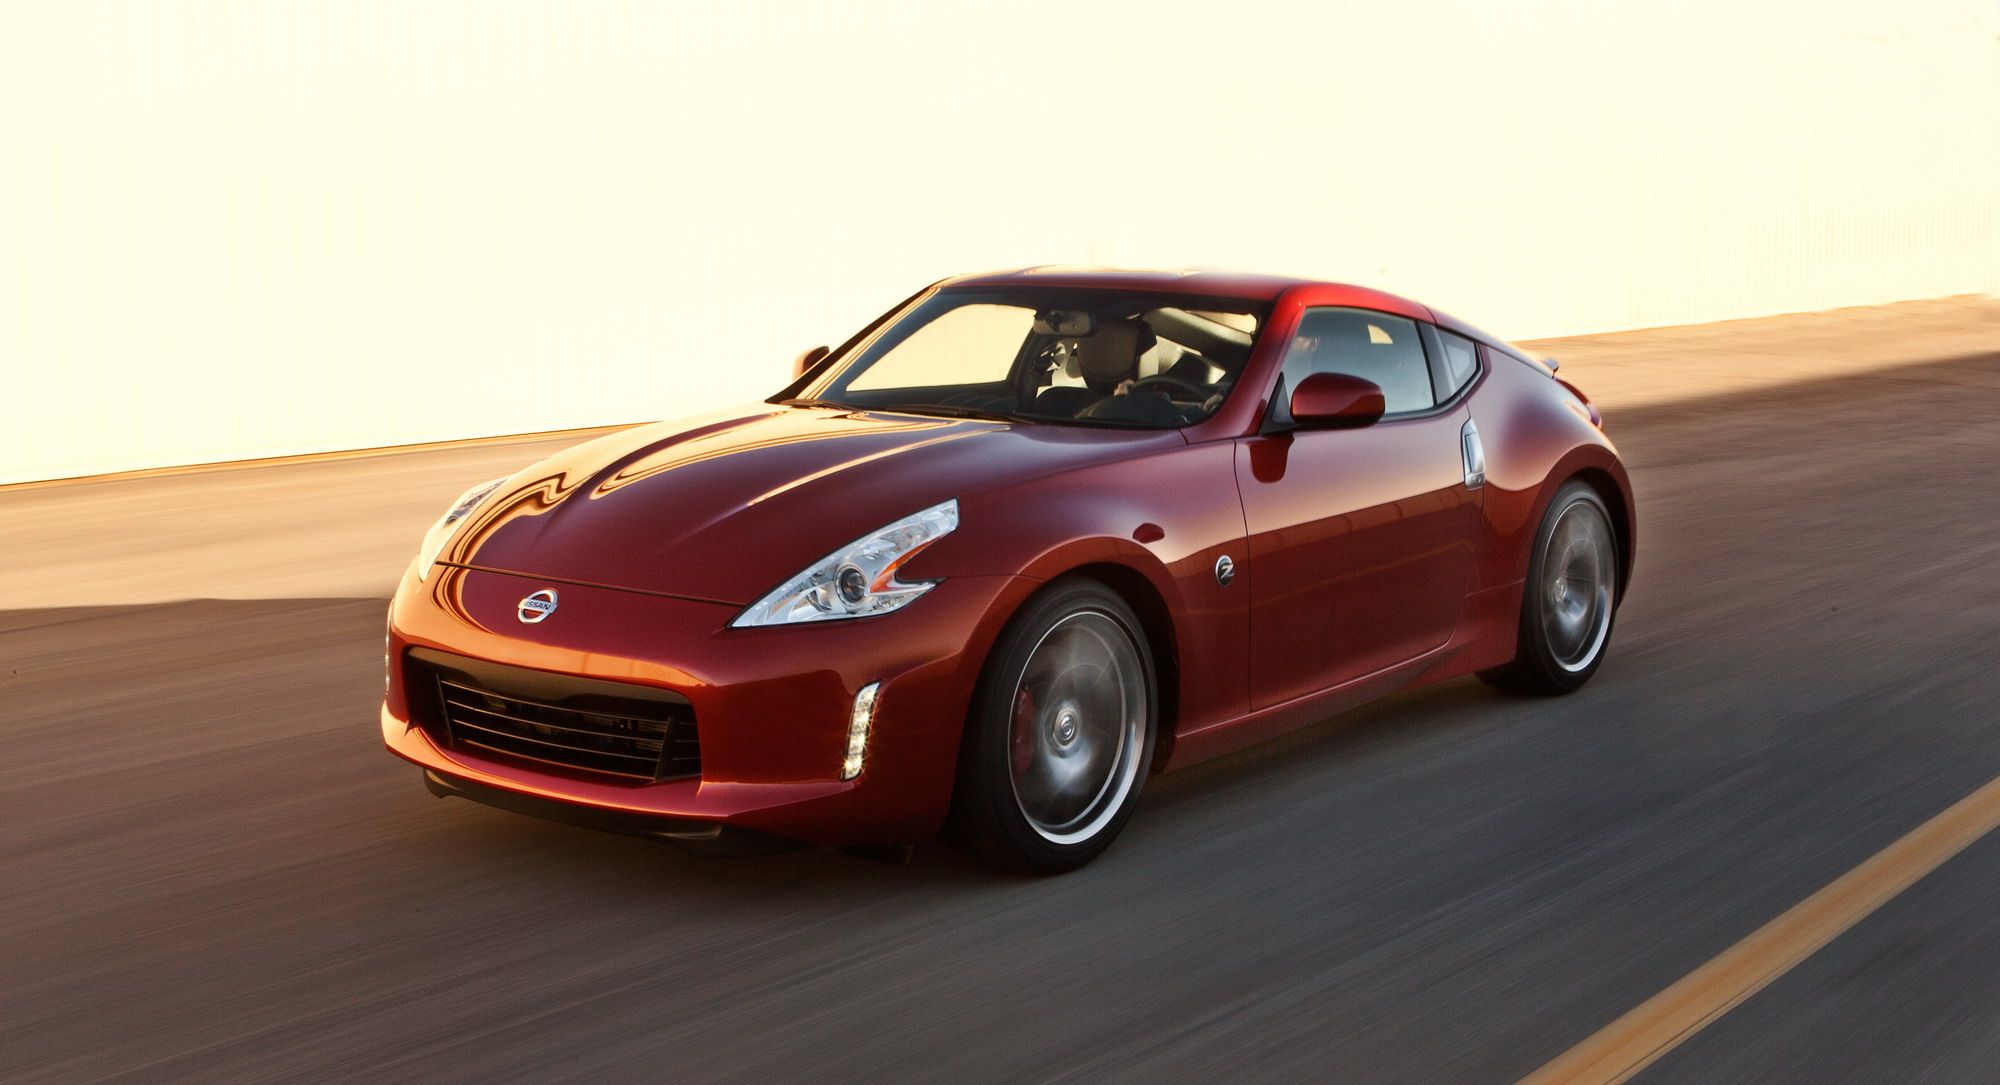 2019 The 370Z Continues to Show its Age, Yet Nissan Refuses to Kill it